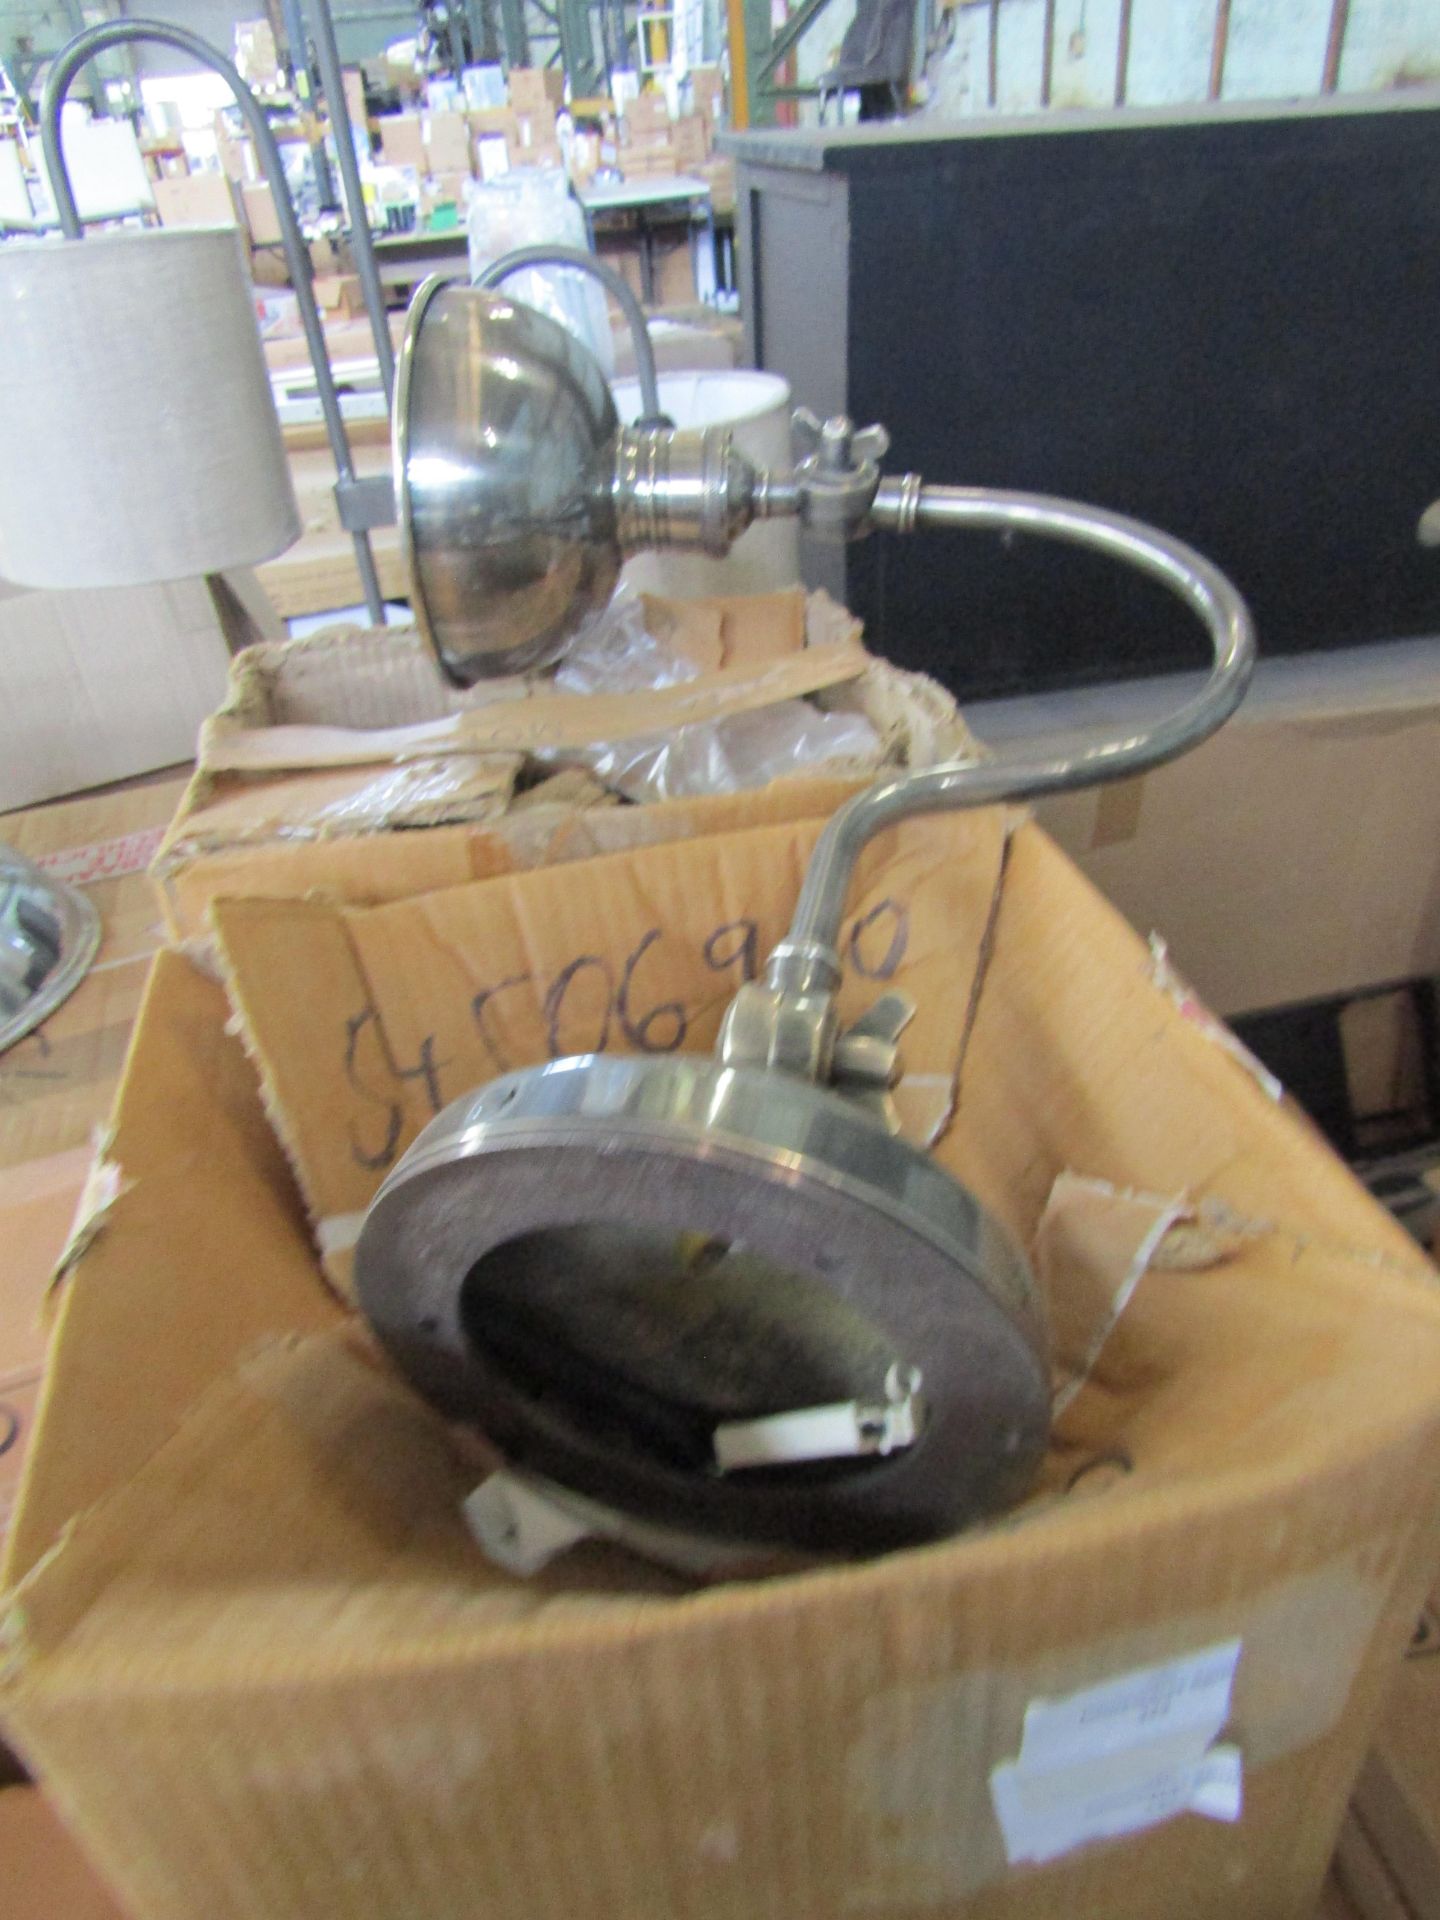 Antique Finish Adjustable Wall Light. Size: H28 x W43 x Diam 15cm - RRP ?180.00 - New & Boxed. (